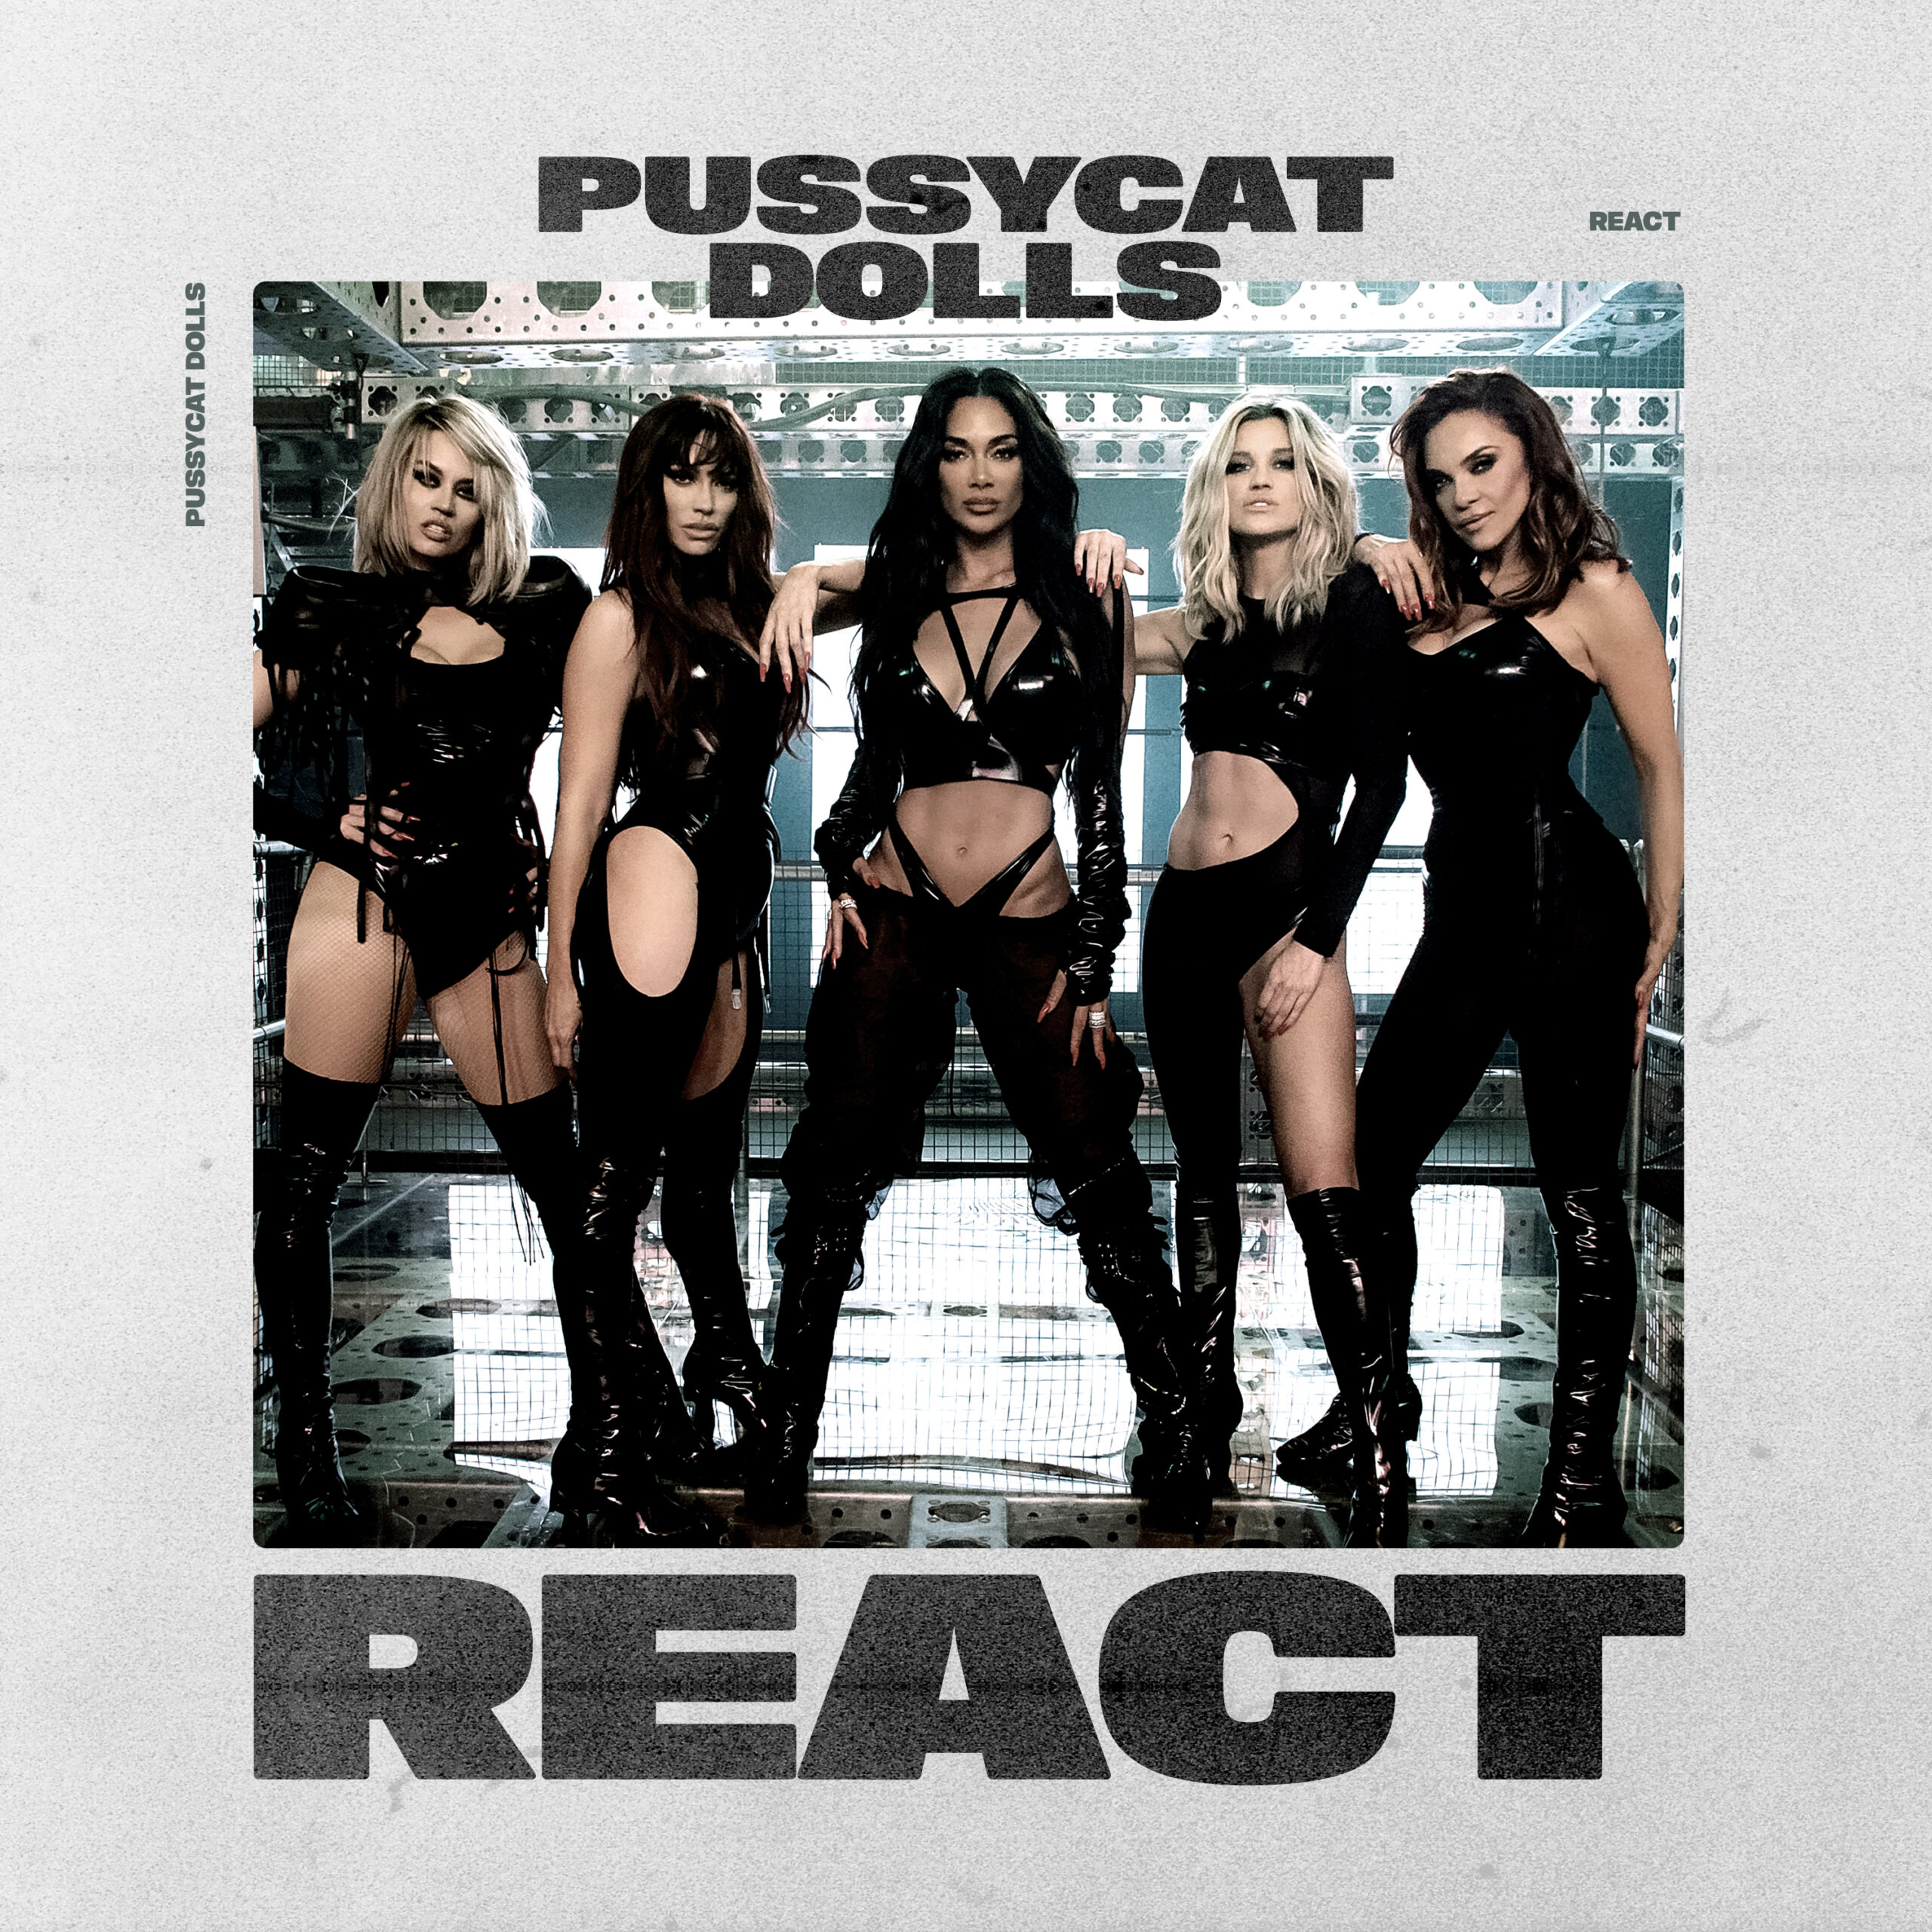 THE PUSSYCAT DOLLS ONE OF THE BIGGEST POP GROUPS RETURN WITH NEW SINGLE ‘REACT’